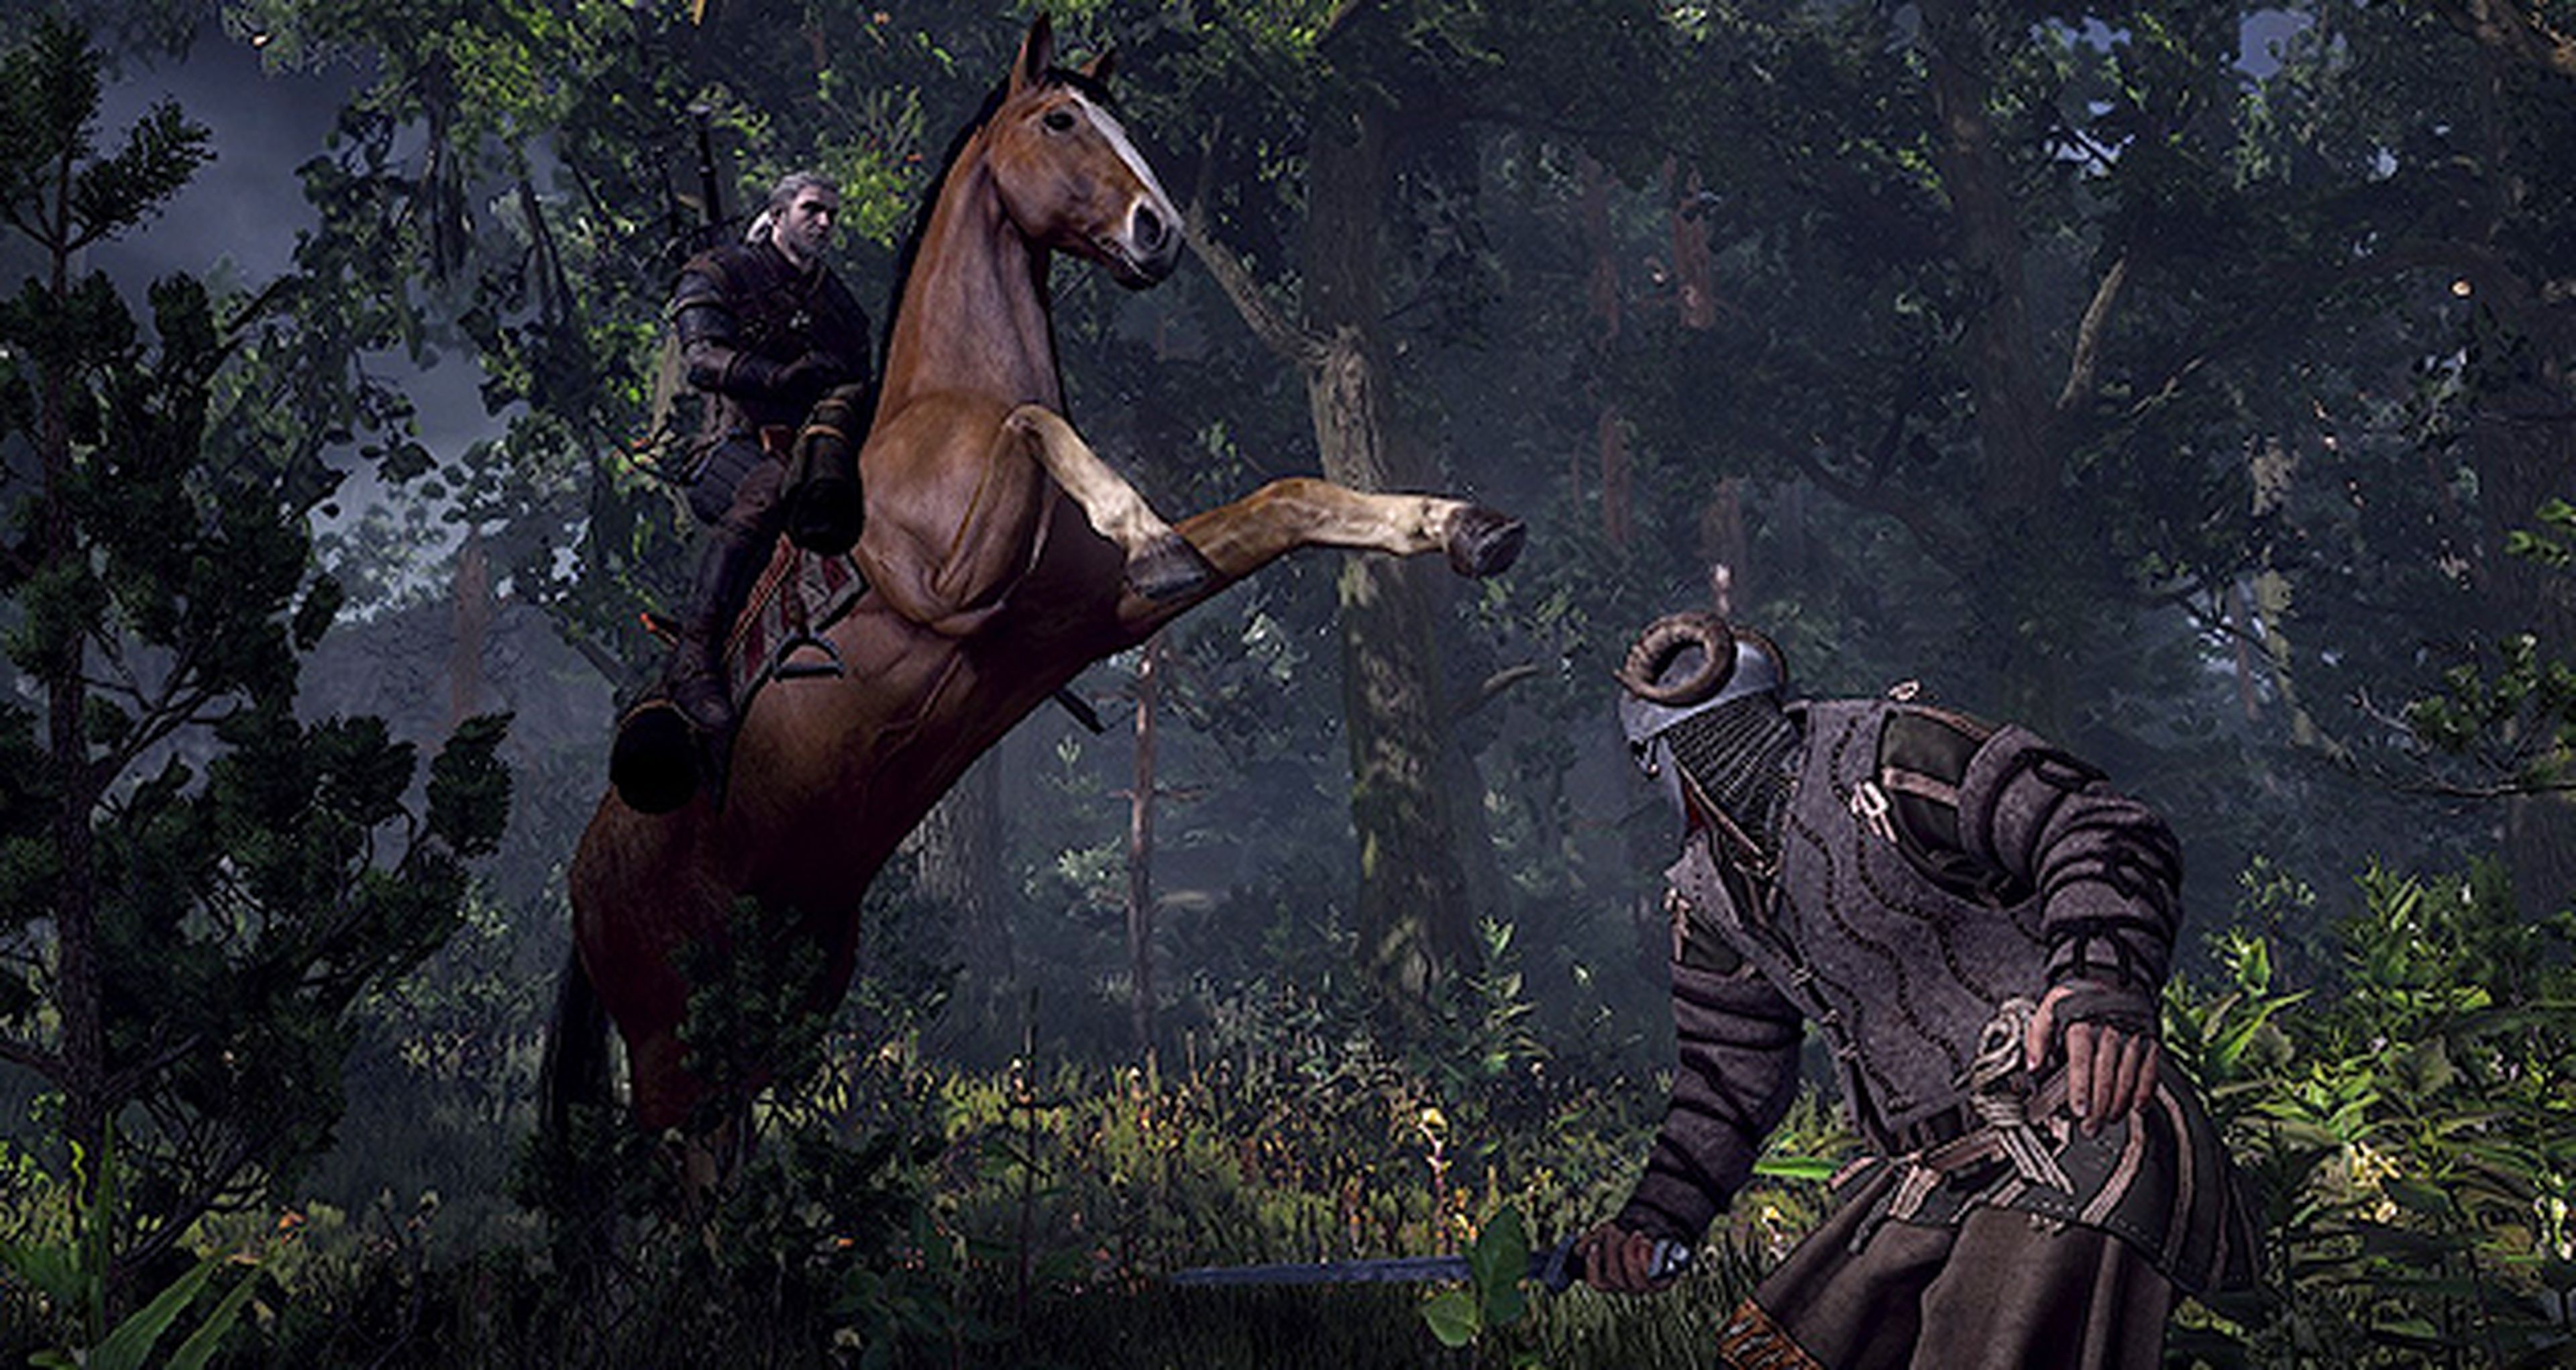 GDC 2013: The Witcher 3 y sus posibilidades